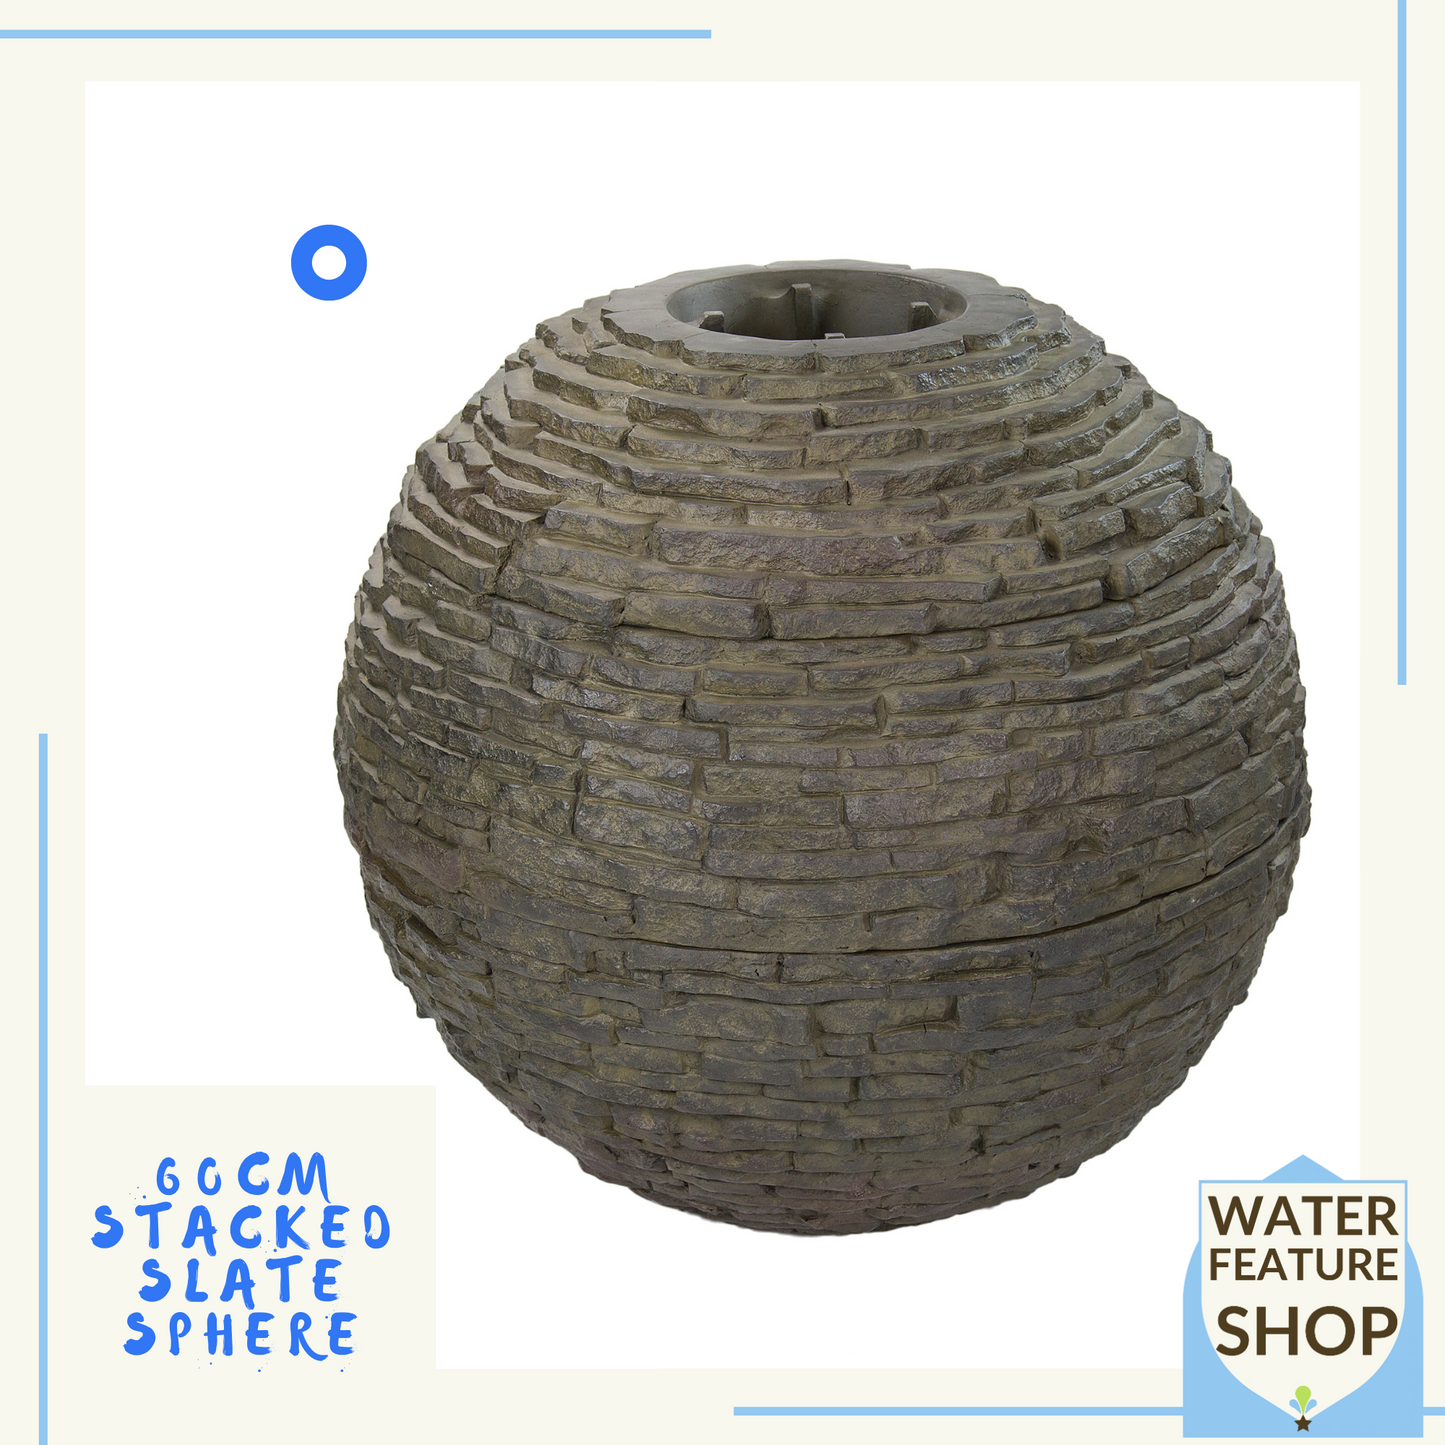 Stacked Slate Sphere - Garden Water Feature